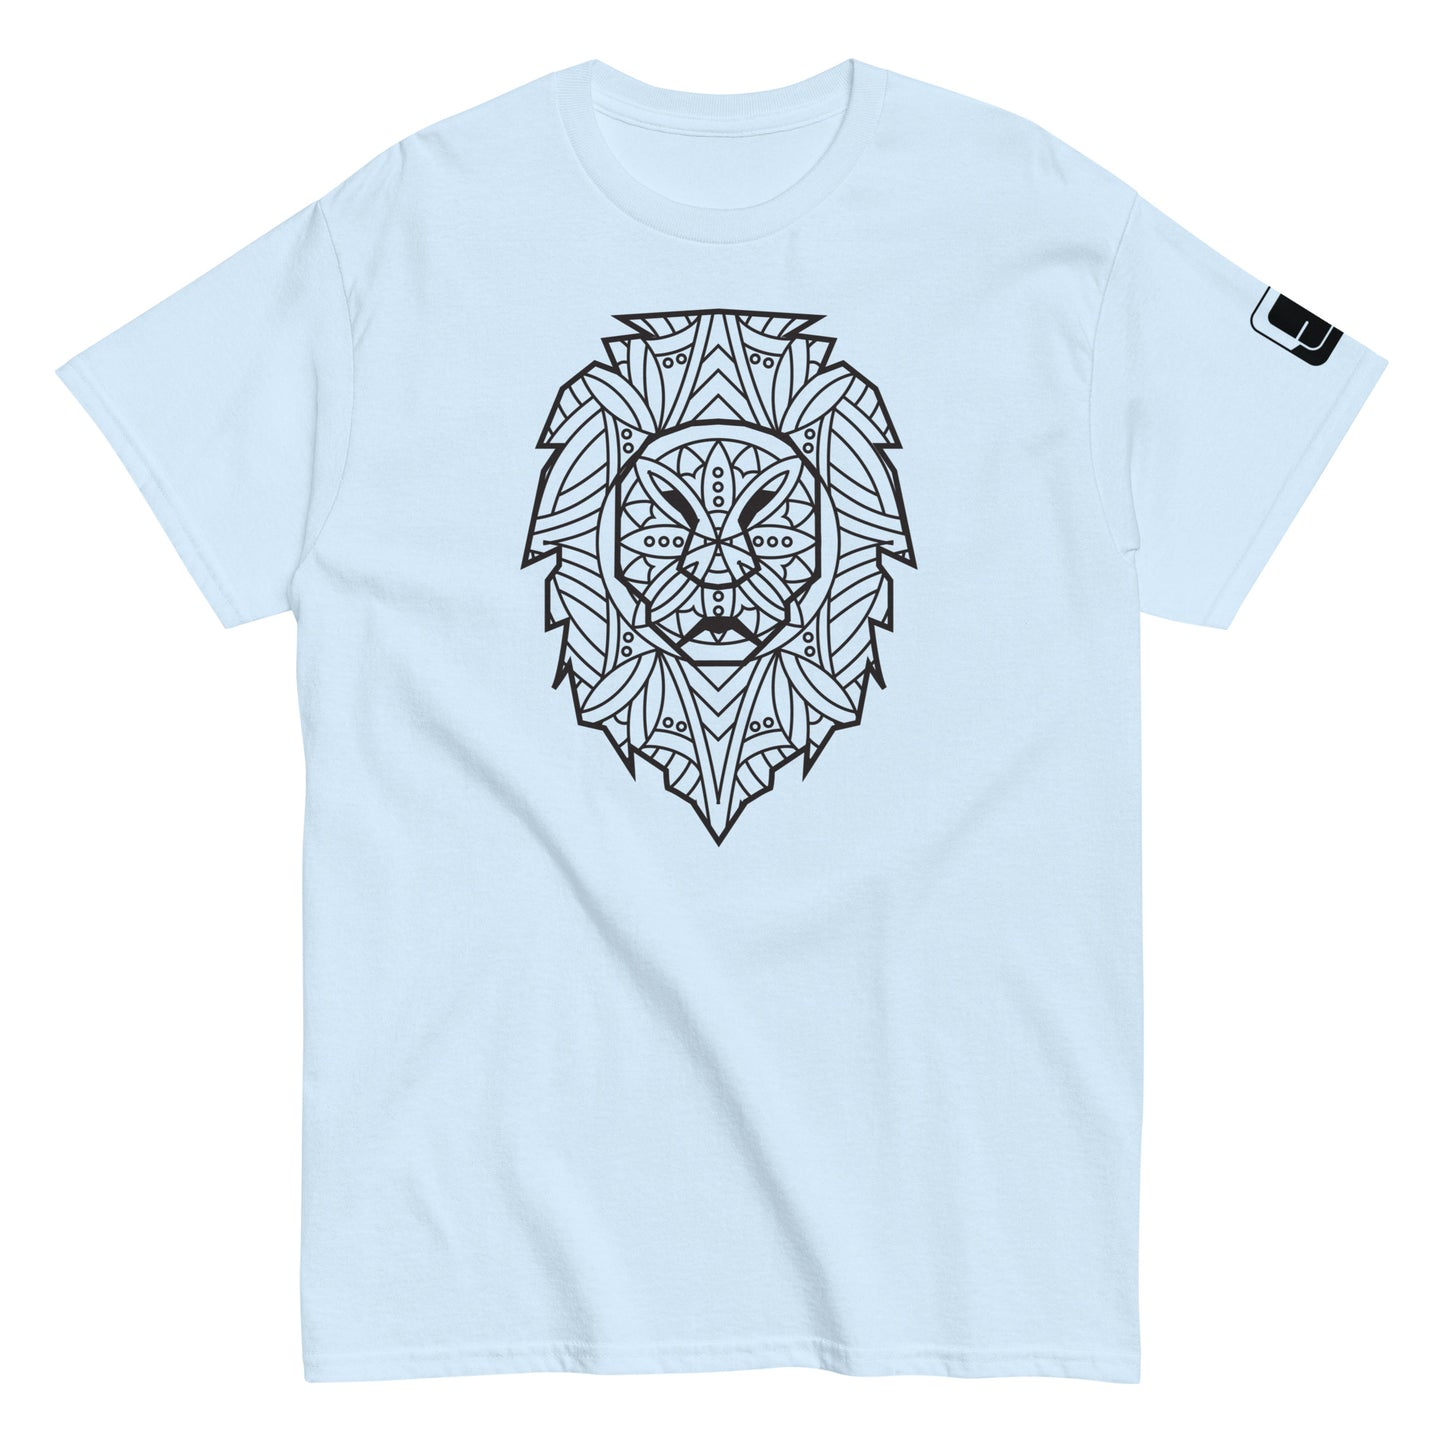 Light Blue colored t-shirt with a large black geometric lion head design on the chest and a small square logo patch on the sleeve, against a white background.